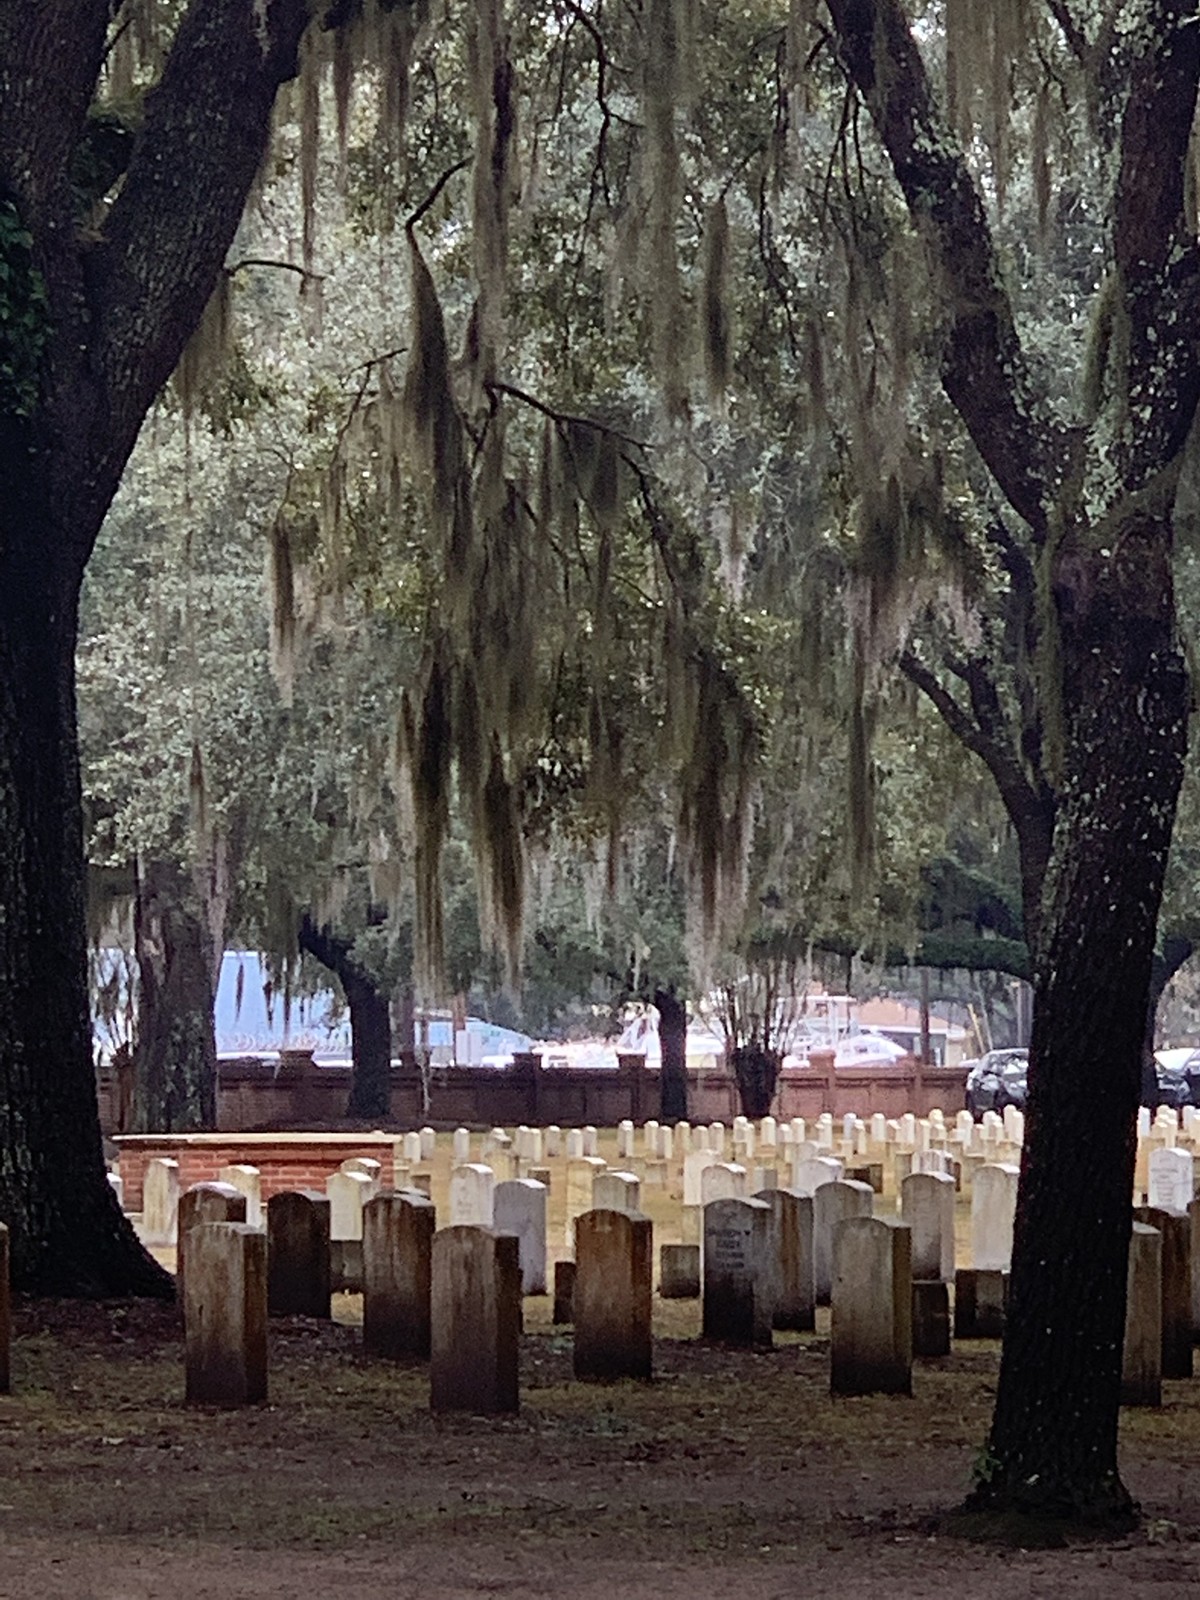 Spanish moss is iconic and popular on Lowcountry trees. But it's